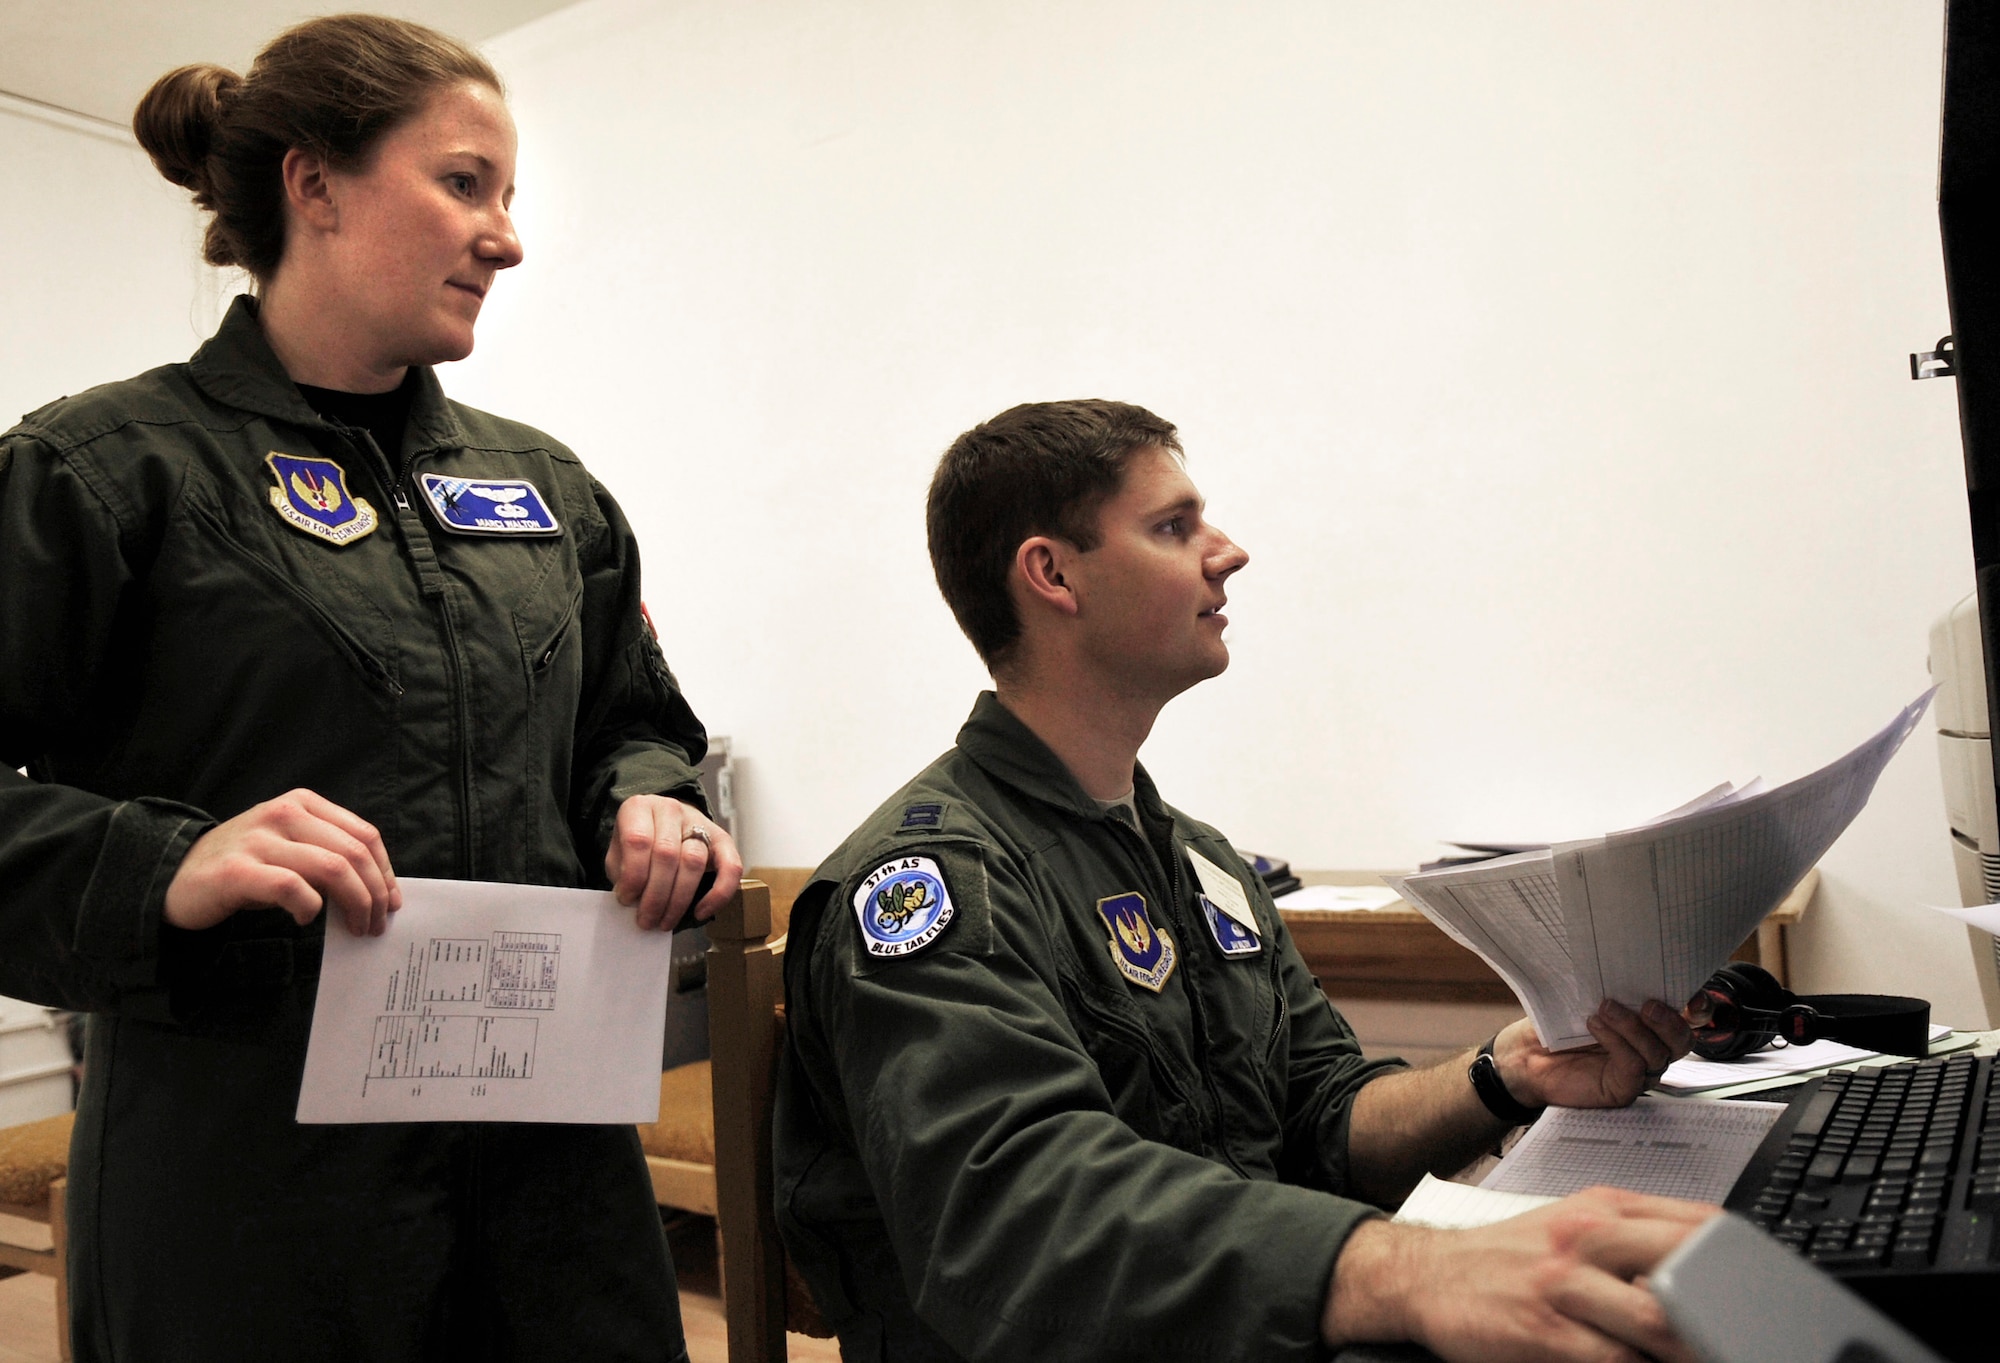 U.S. Air Force Captains Marci and Dan Walton, 37th Airlift Squadron pilots, work side-by-side in the command center of Carpathian Spring 2011, Airlift Base Otopeni, Romania March 17, 2011. Capt. Marcie Walton is serving as chief of tactics and Capt. Dan Walton as mission commander of this exercise. This is the first time the married couple has had the opportunity to work together on this scale. Carpathian Spring 2011is a building partnership capacity exercise where members of the U.S. military join their Romanian counterparts to learn from one another and strengthen alliances. (U.S. Air Force Photo by Tech Sgt. Jocelyn L. Rich)